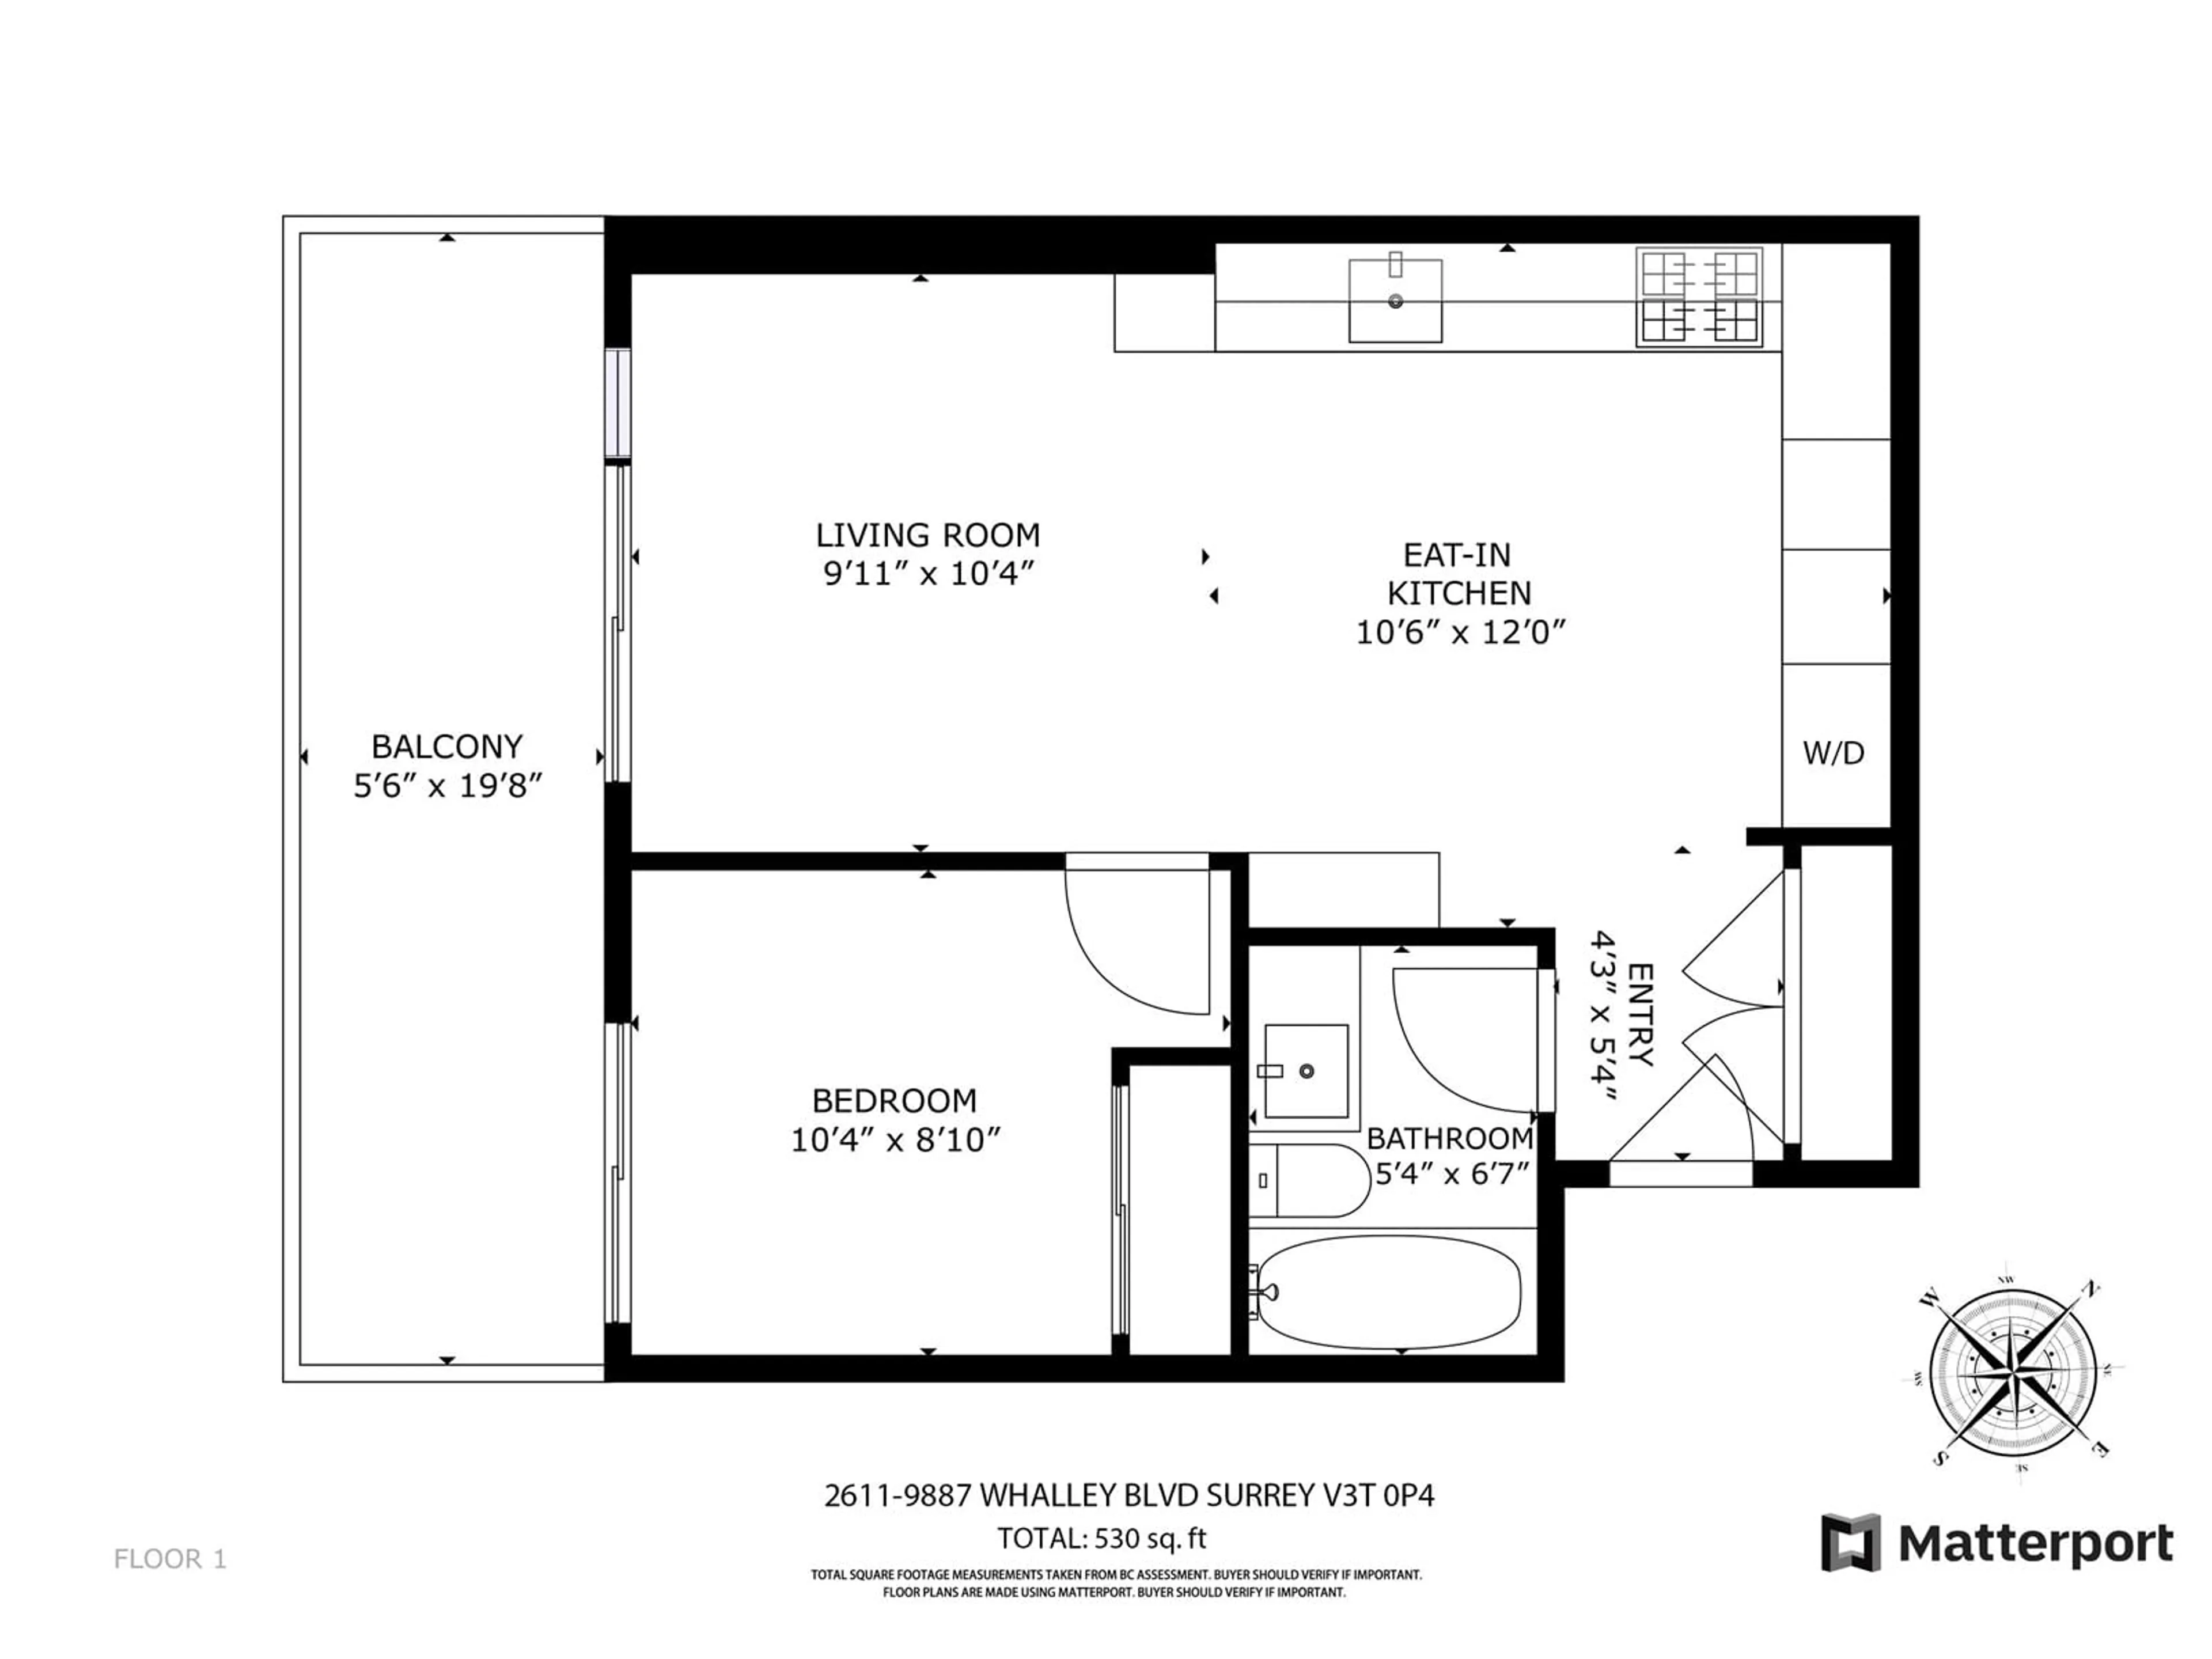 Floor plan for 2611 9887 WHALLEY BOULEVARD, Surrey British Columbia V3T0P4